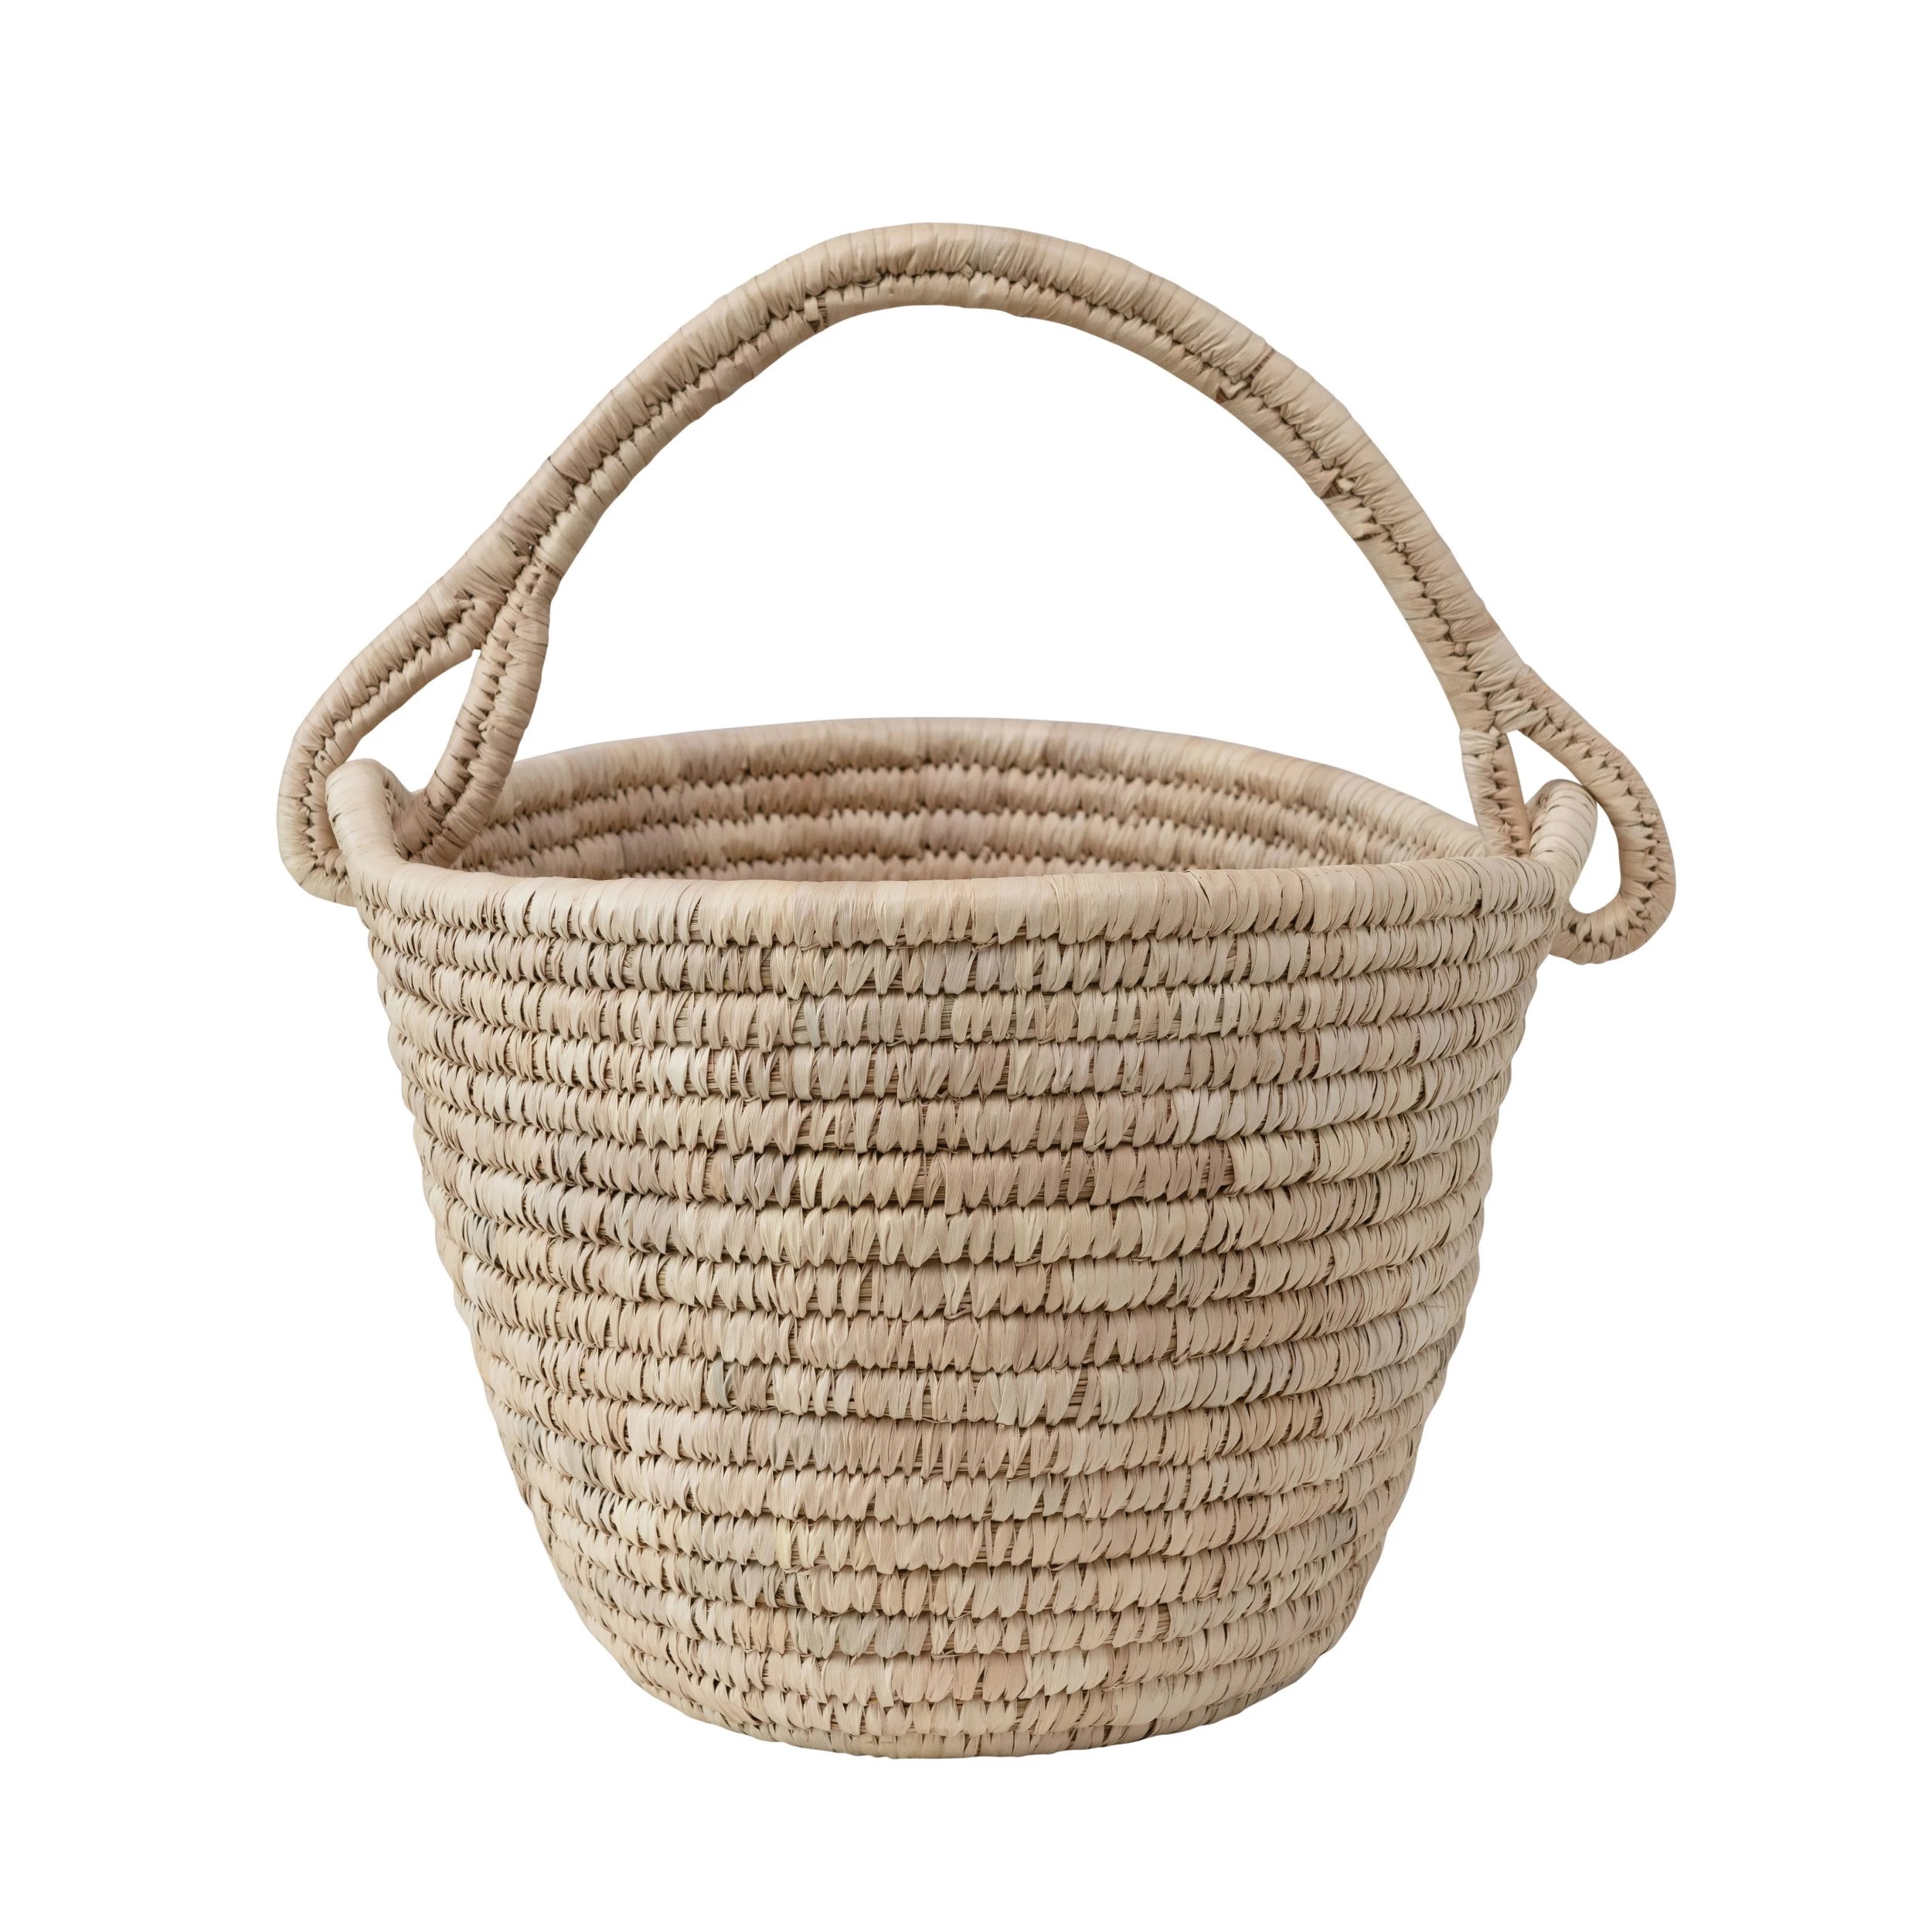 Hand-Woven Grass and Date Leaf Basket with Handle - Image 3